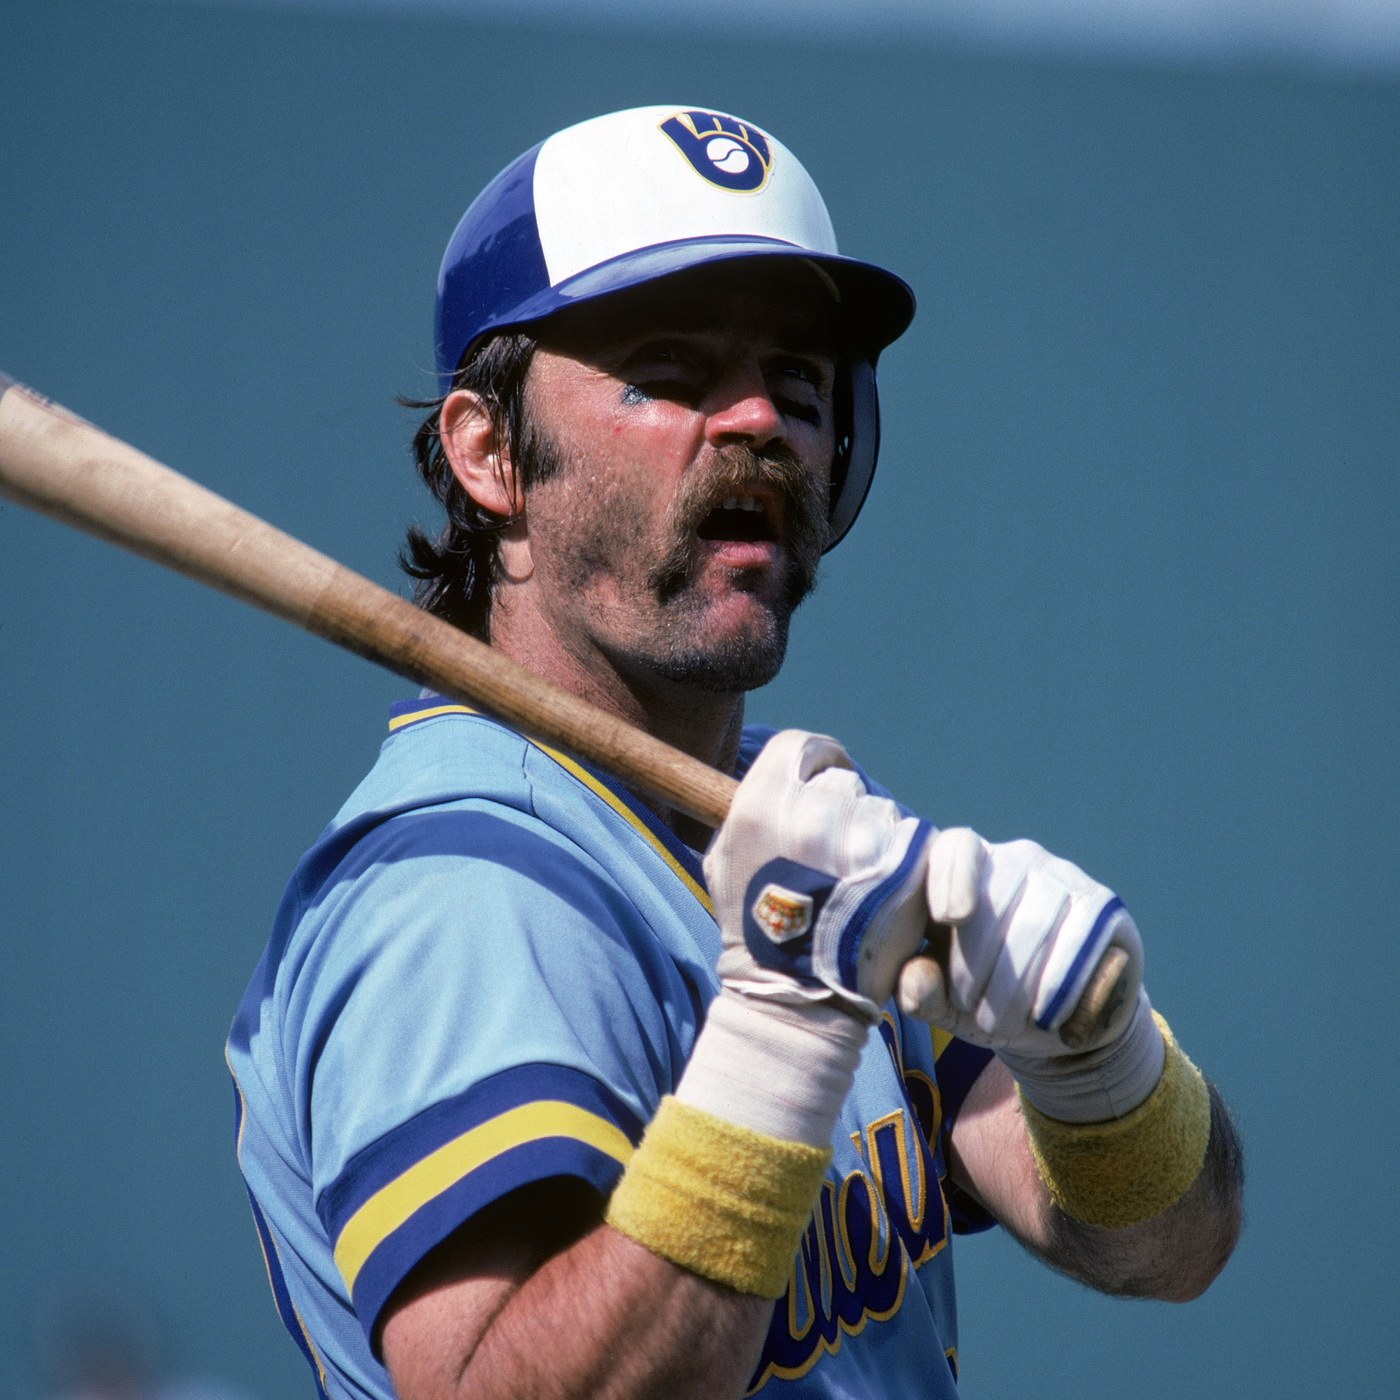 Gorman Thomas might be one of the most beloved Brewers of all time